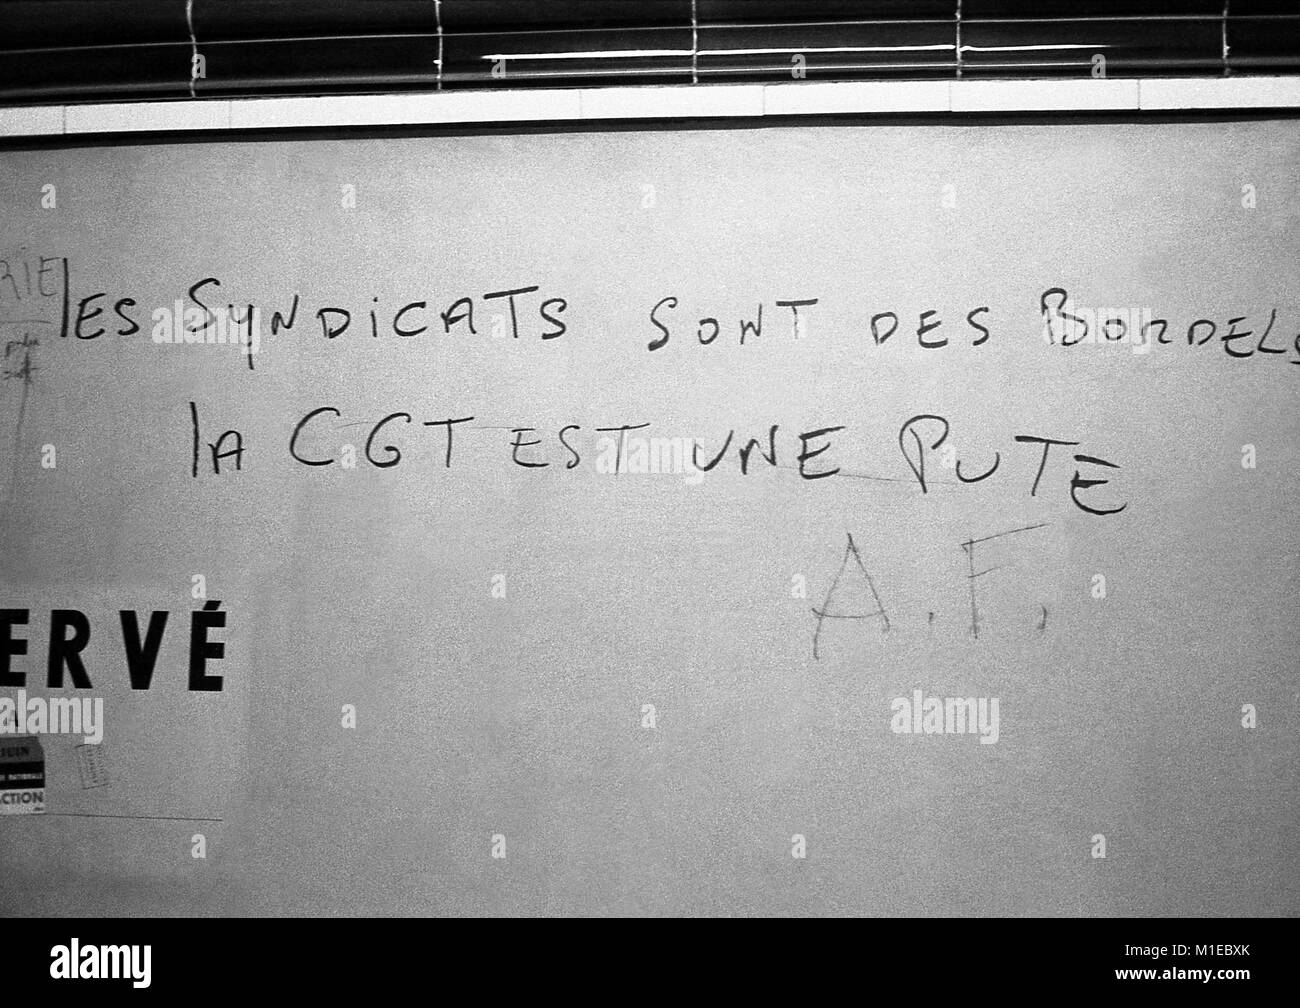 Philippe Gras / Le Pictorium -  Events of may 1968 in FRANCE. -  1968  -  France / Ile-de-France (region) / Paris  -  Events of 1968 in FRANCE. -  "Be young and shut up!", "It's only the beginning of the struggle!", "Burst of enthousiasm for a long war!" : that's some examples of the solgans and revendications made by the Working Class and the Students. Stock Photo